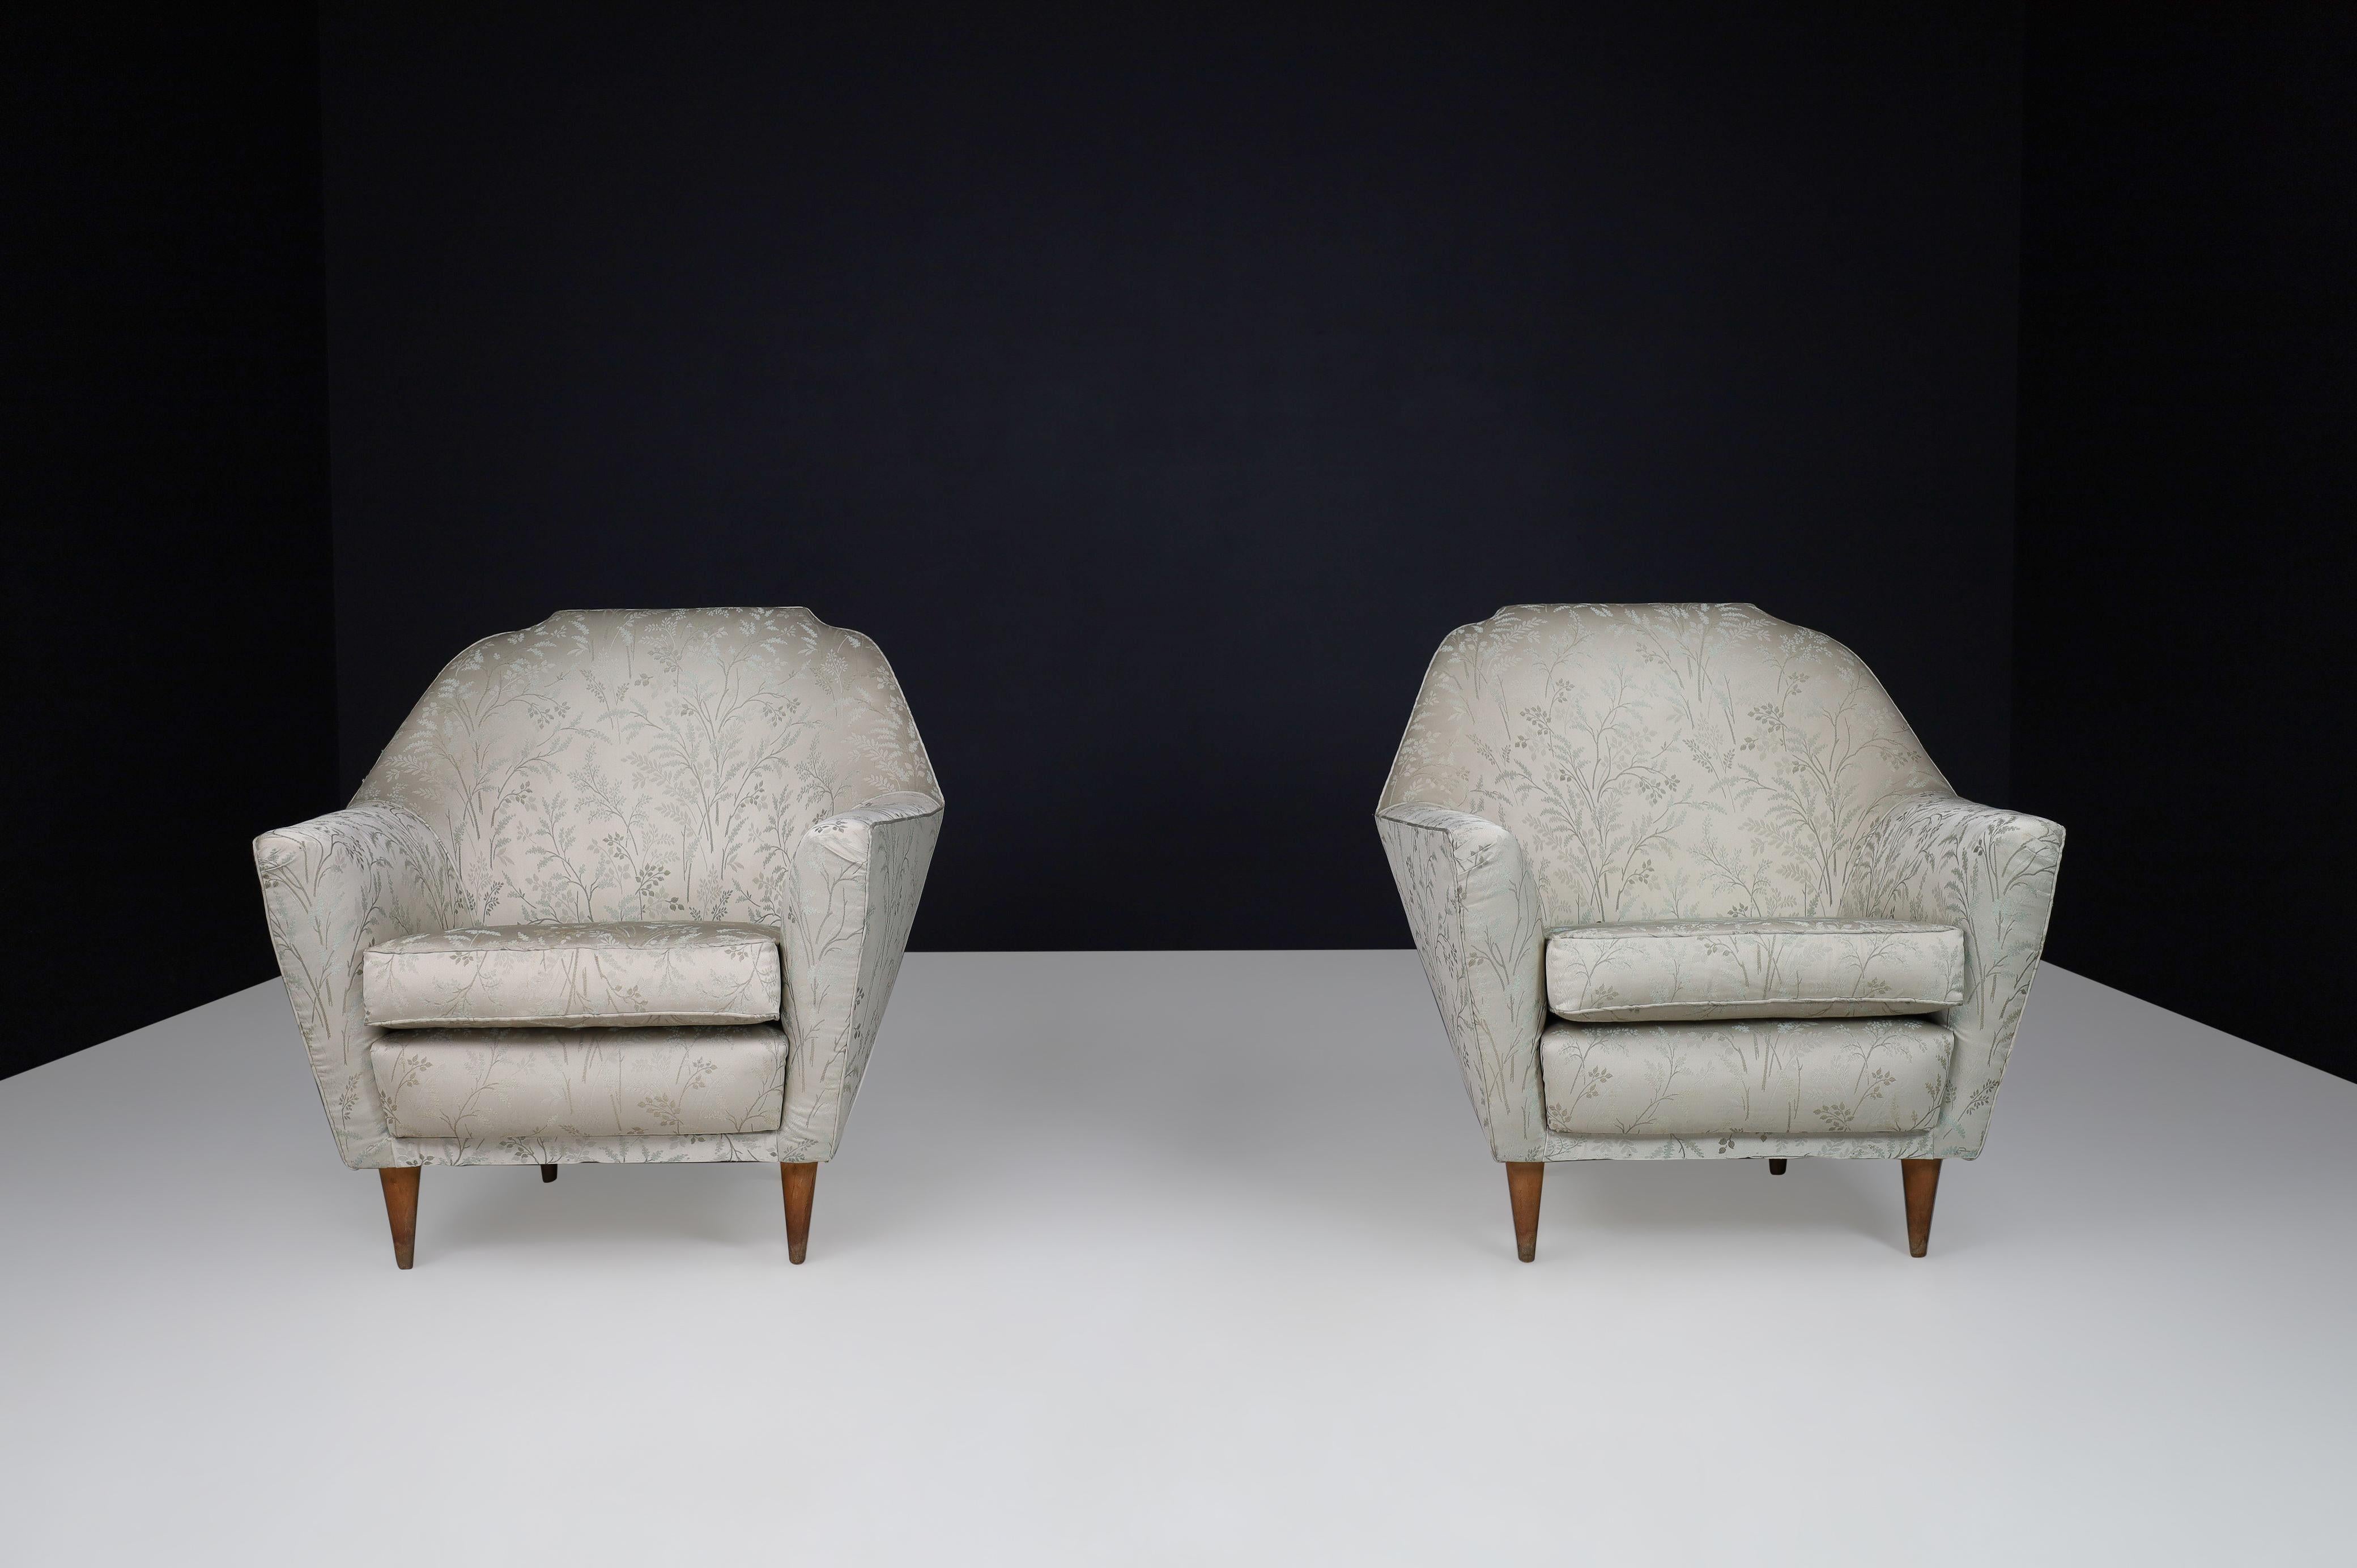 20th Century Ico Parisi Armchairs in Fabric and Tapered wooden Legs, Italy 1950s For Sale